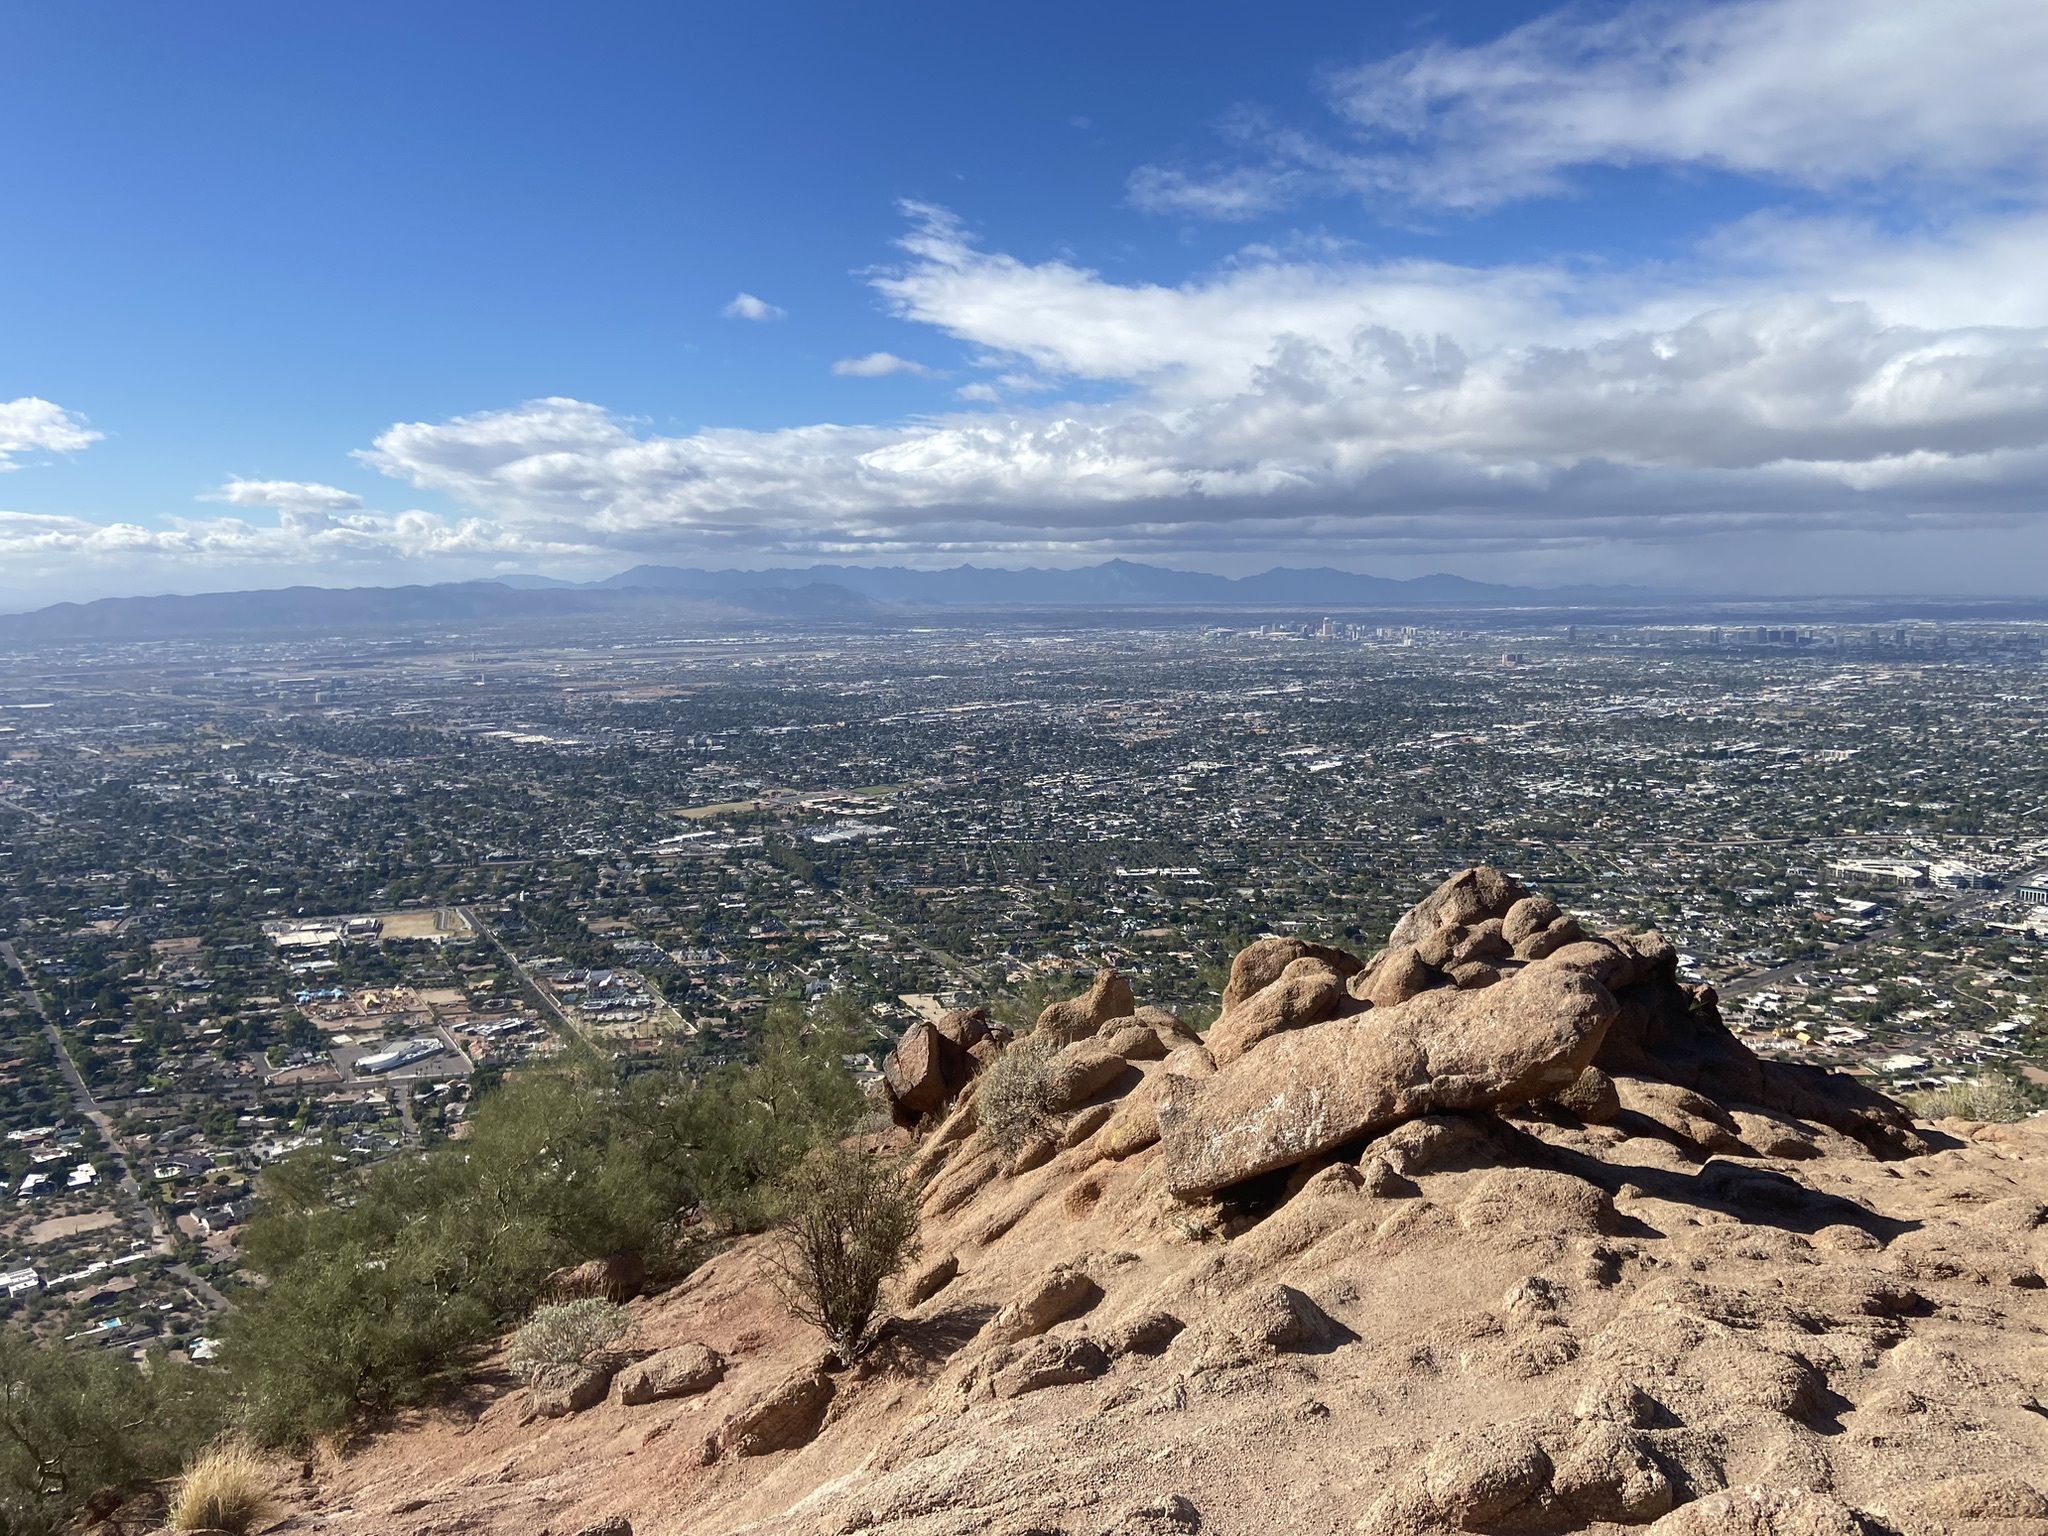 Views of Scottsdale from the famous Camelback Mountain